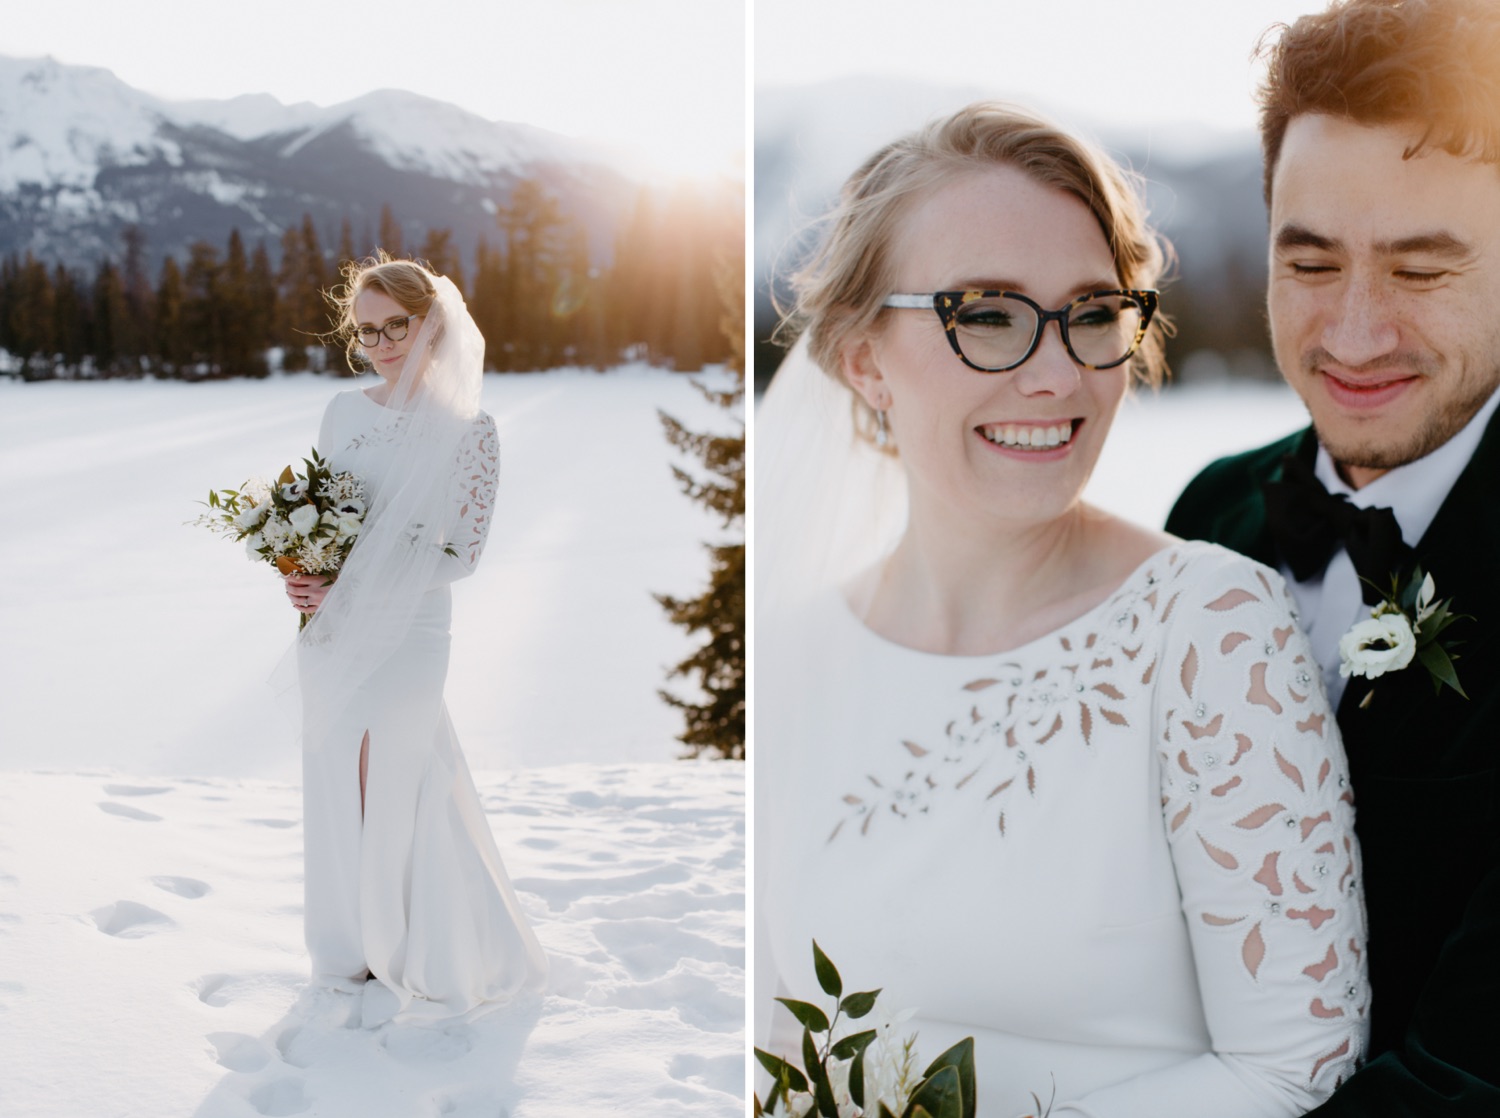 Classic winter bridal style for a Jasper National Park wedding